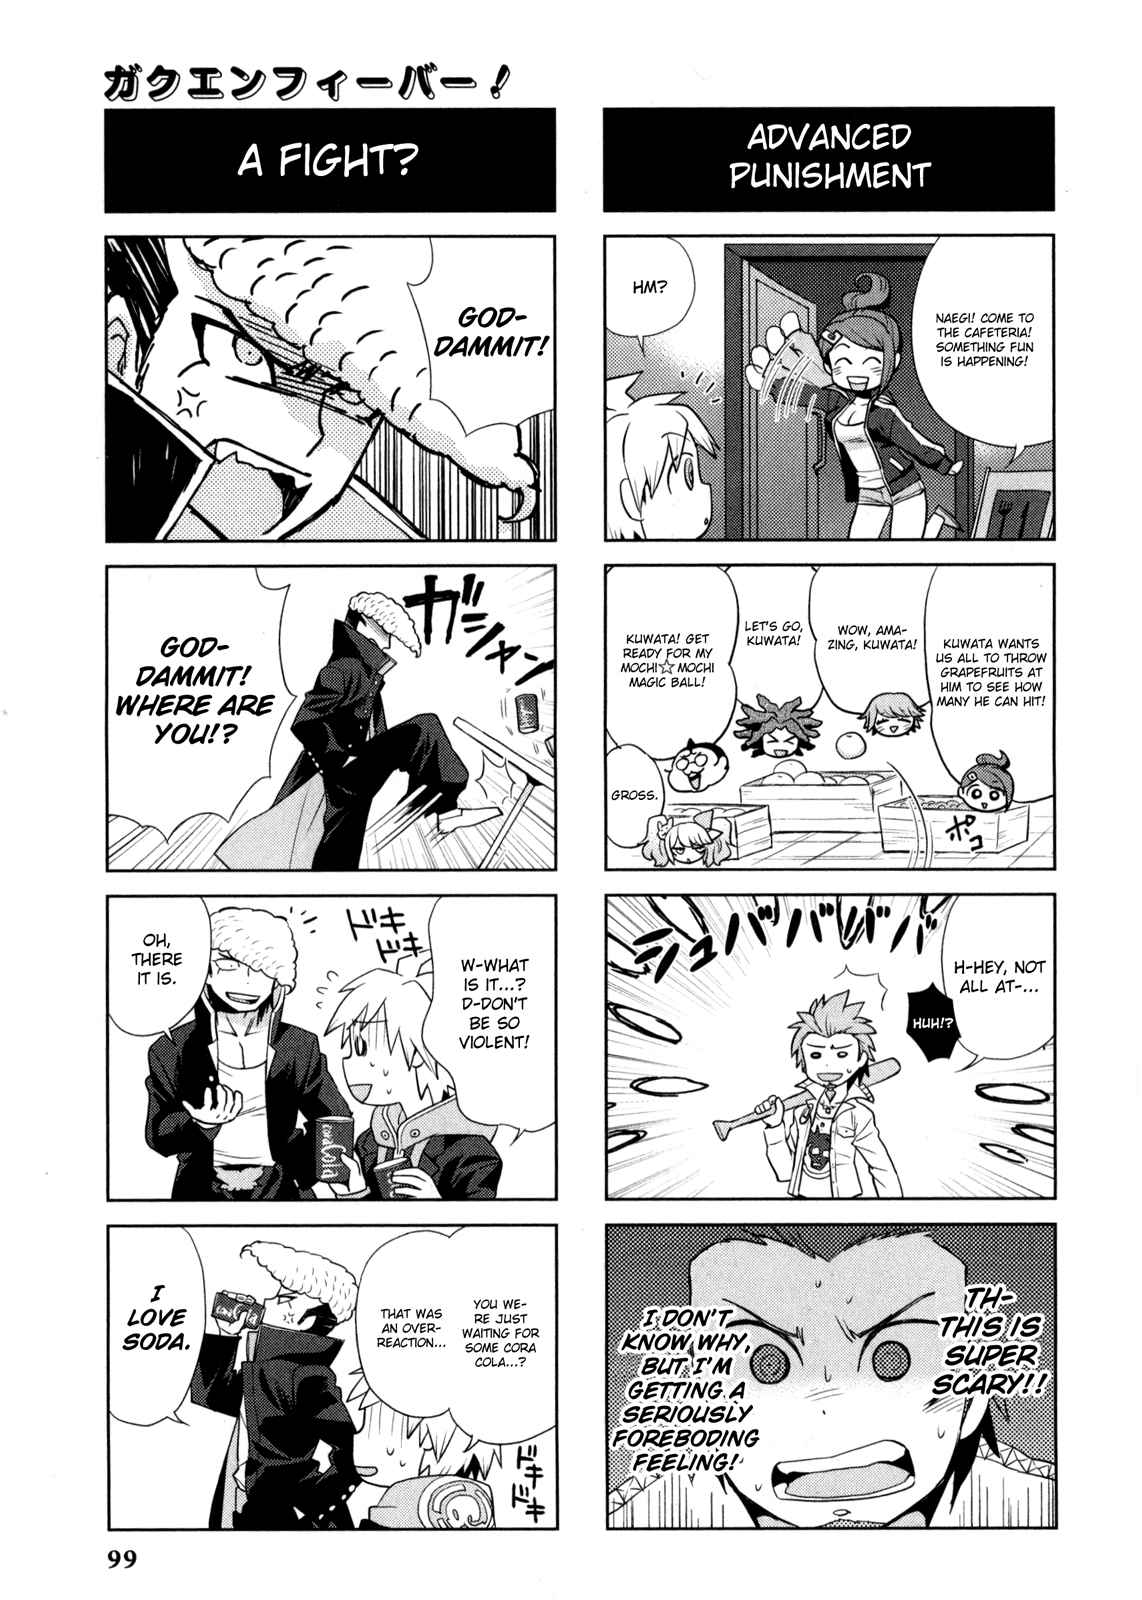 Danganronpa The Academy of Hope and the High School Students of Despair 4 koma Kings Vol. 2 Ch. 16 Academy Fever! by Mago